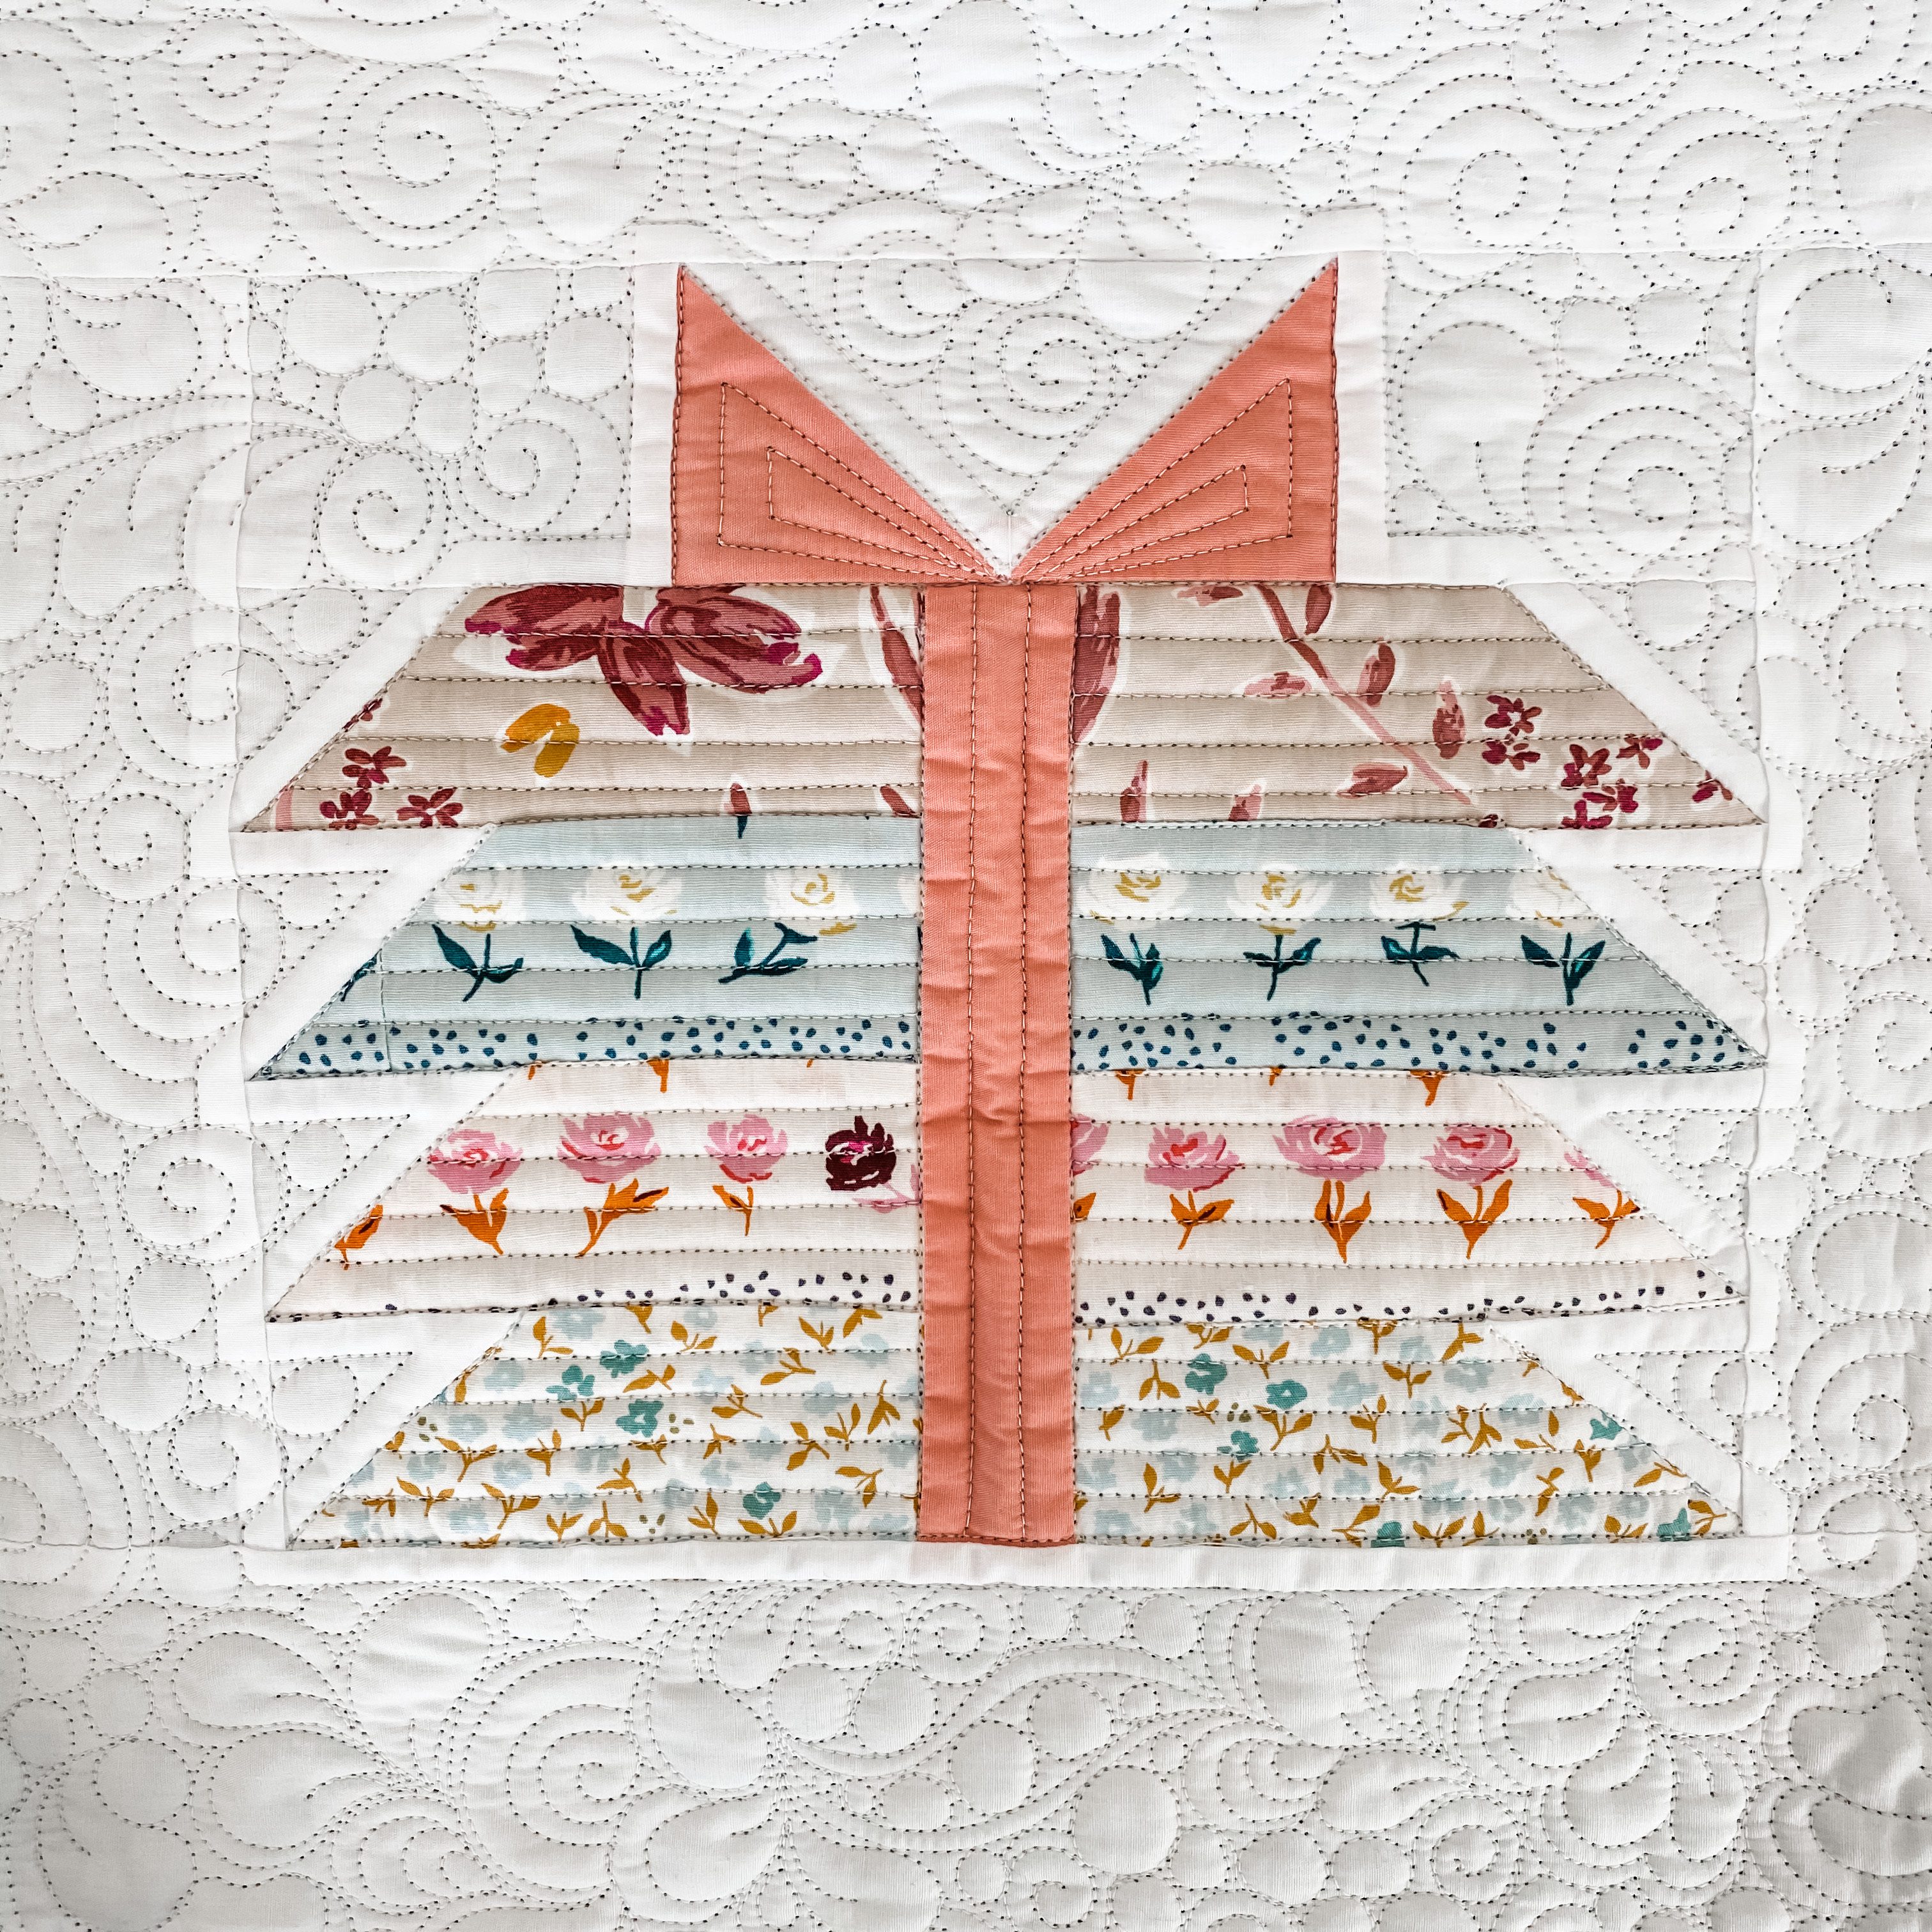 One 'Bundle Of Joy' Quilt block with a pink ribbon and blue and pink floral fabric.